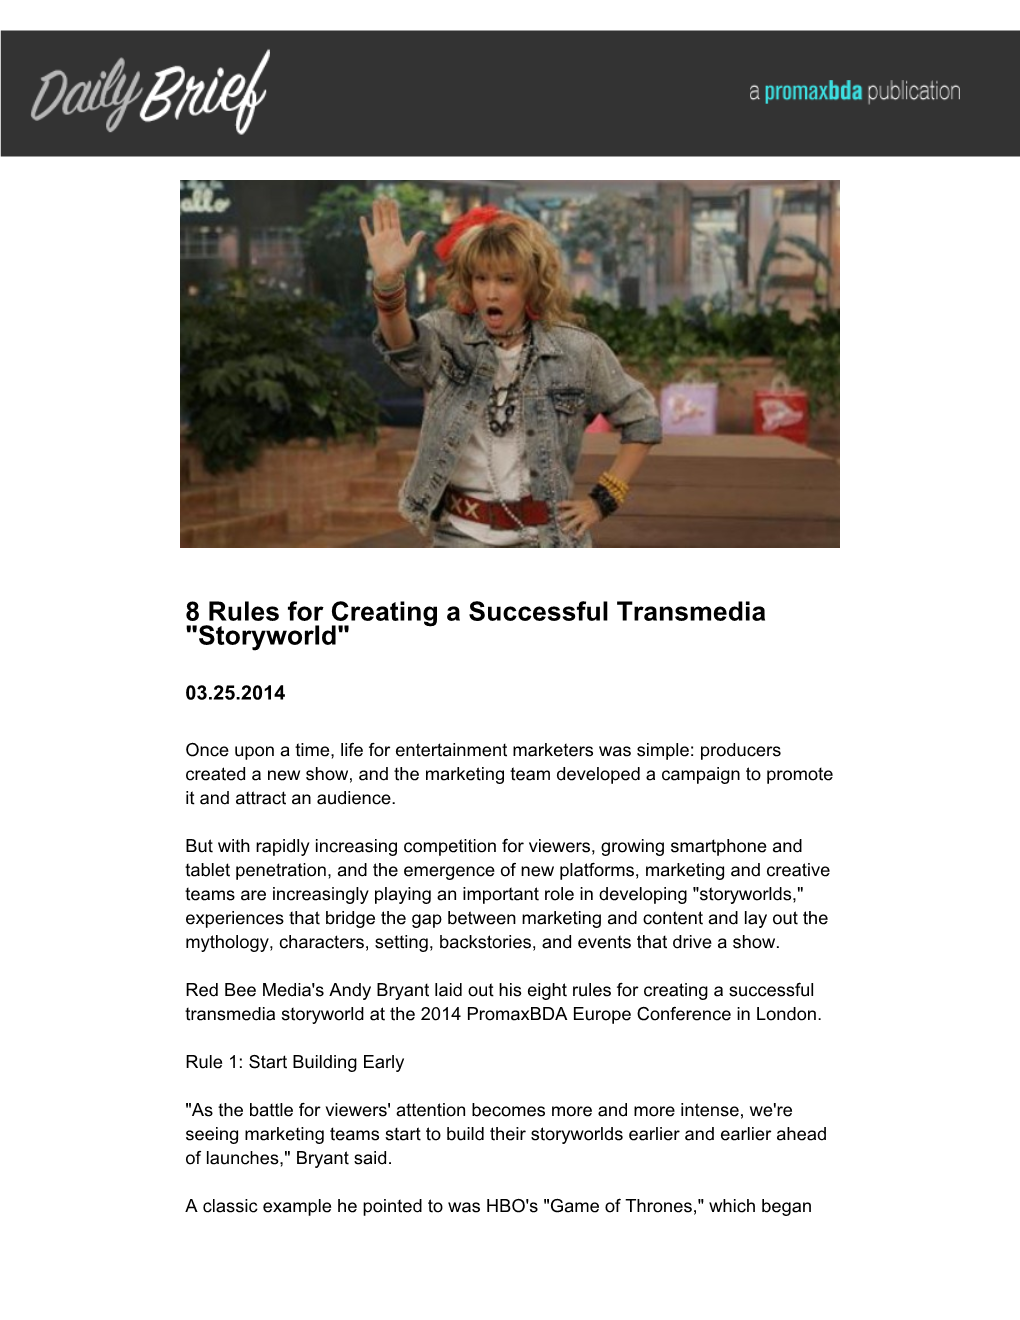 8 Rules for Creating a Successful Transmedia "Storyworld"